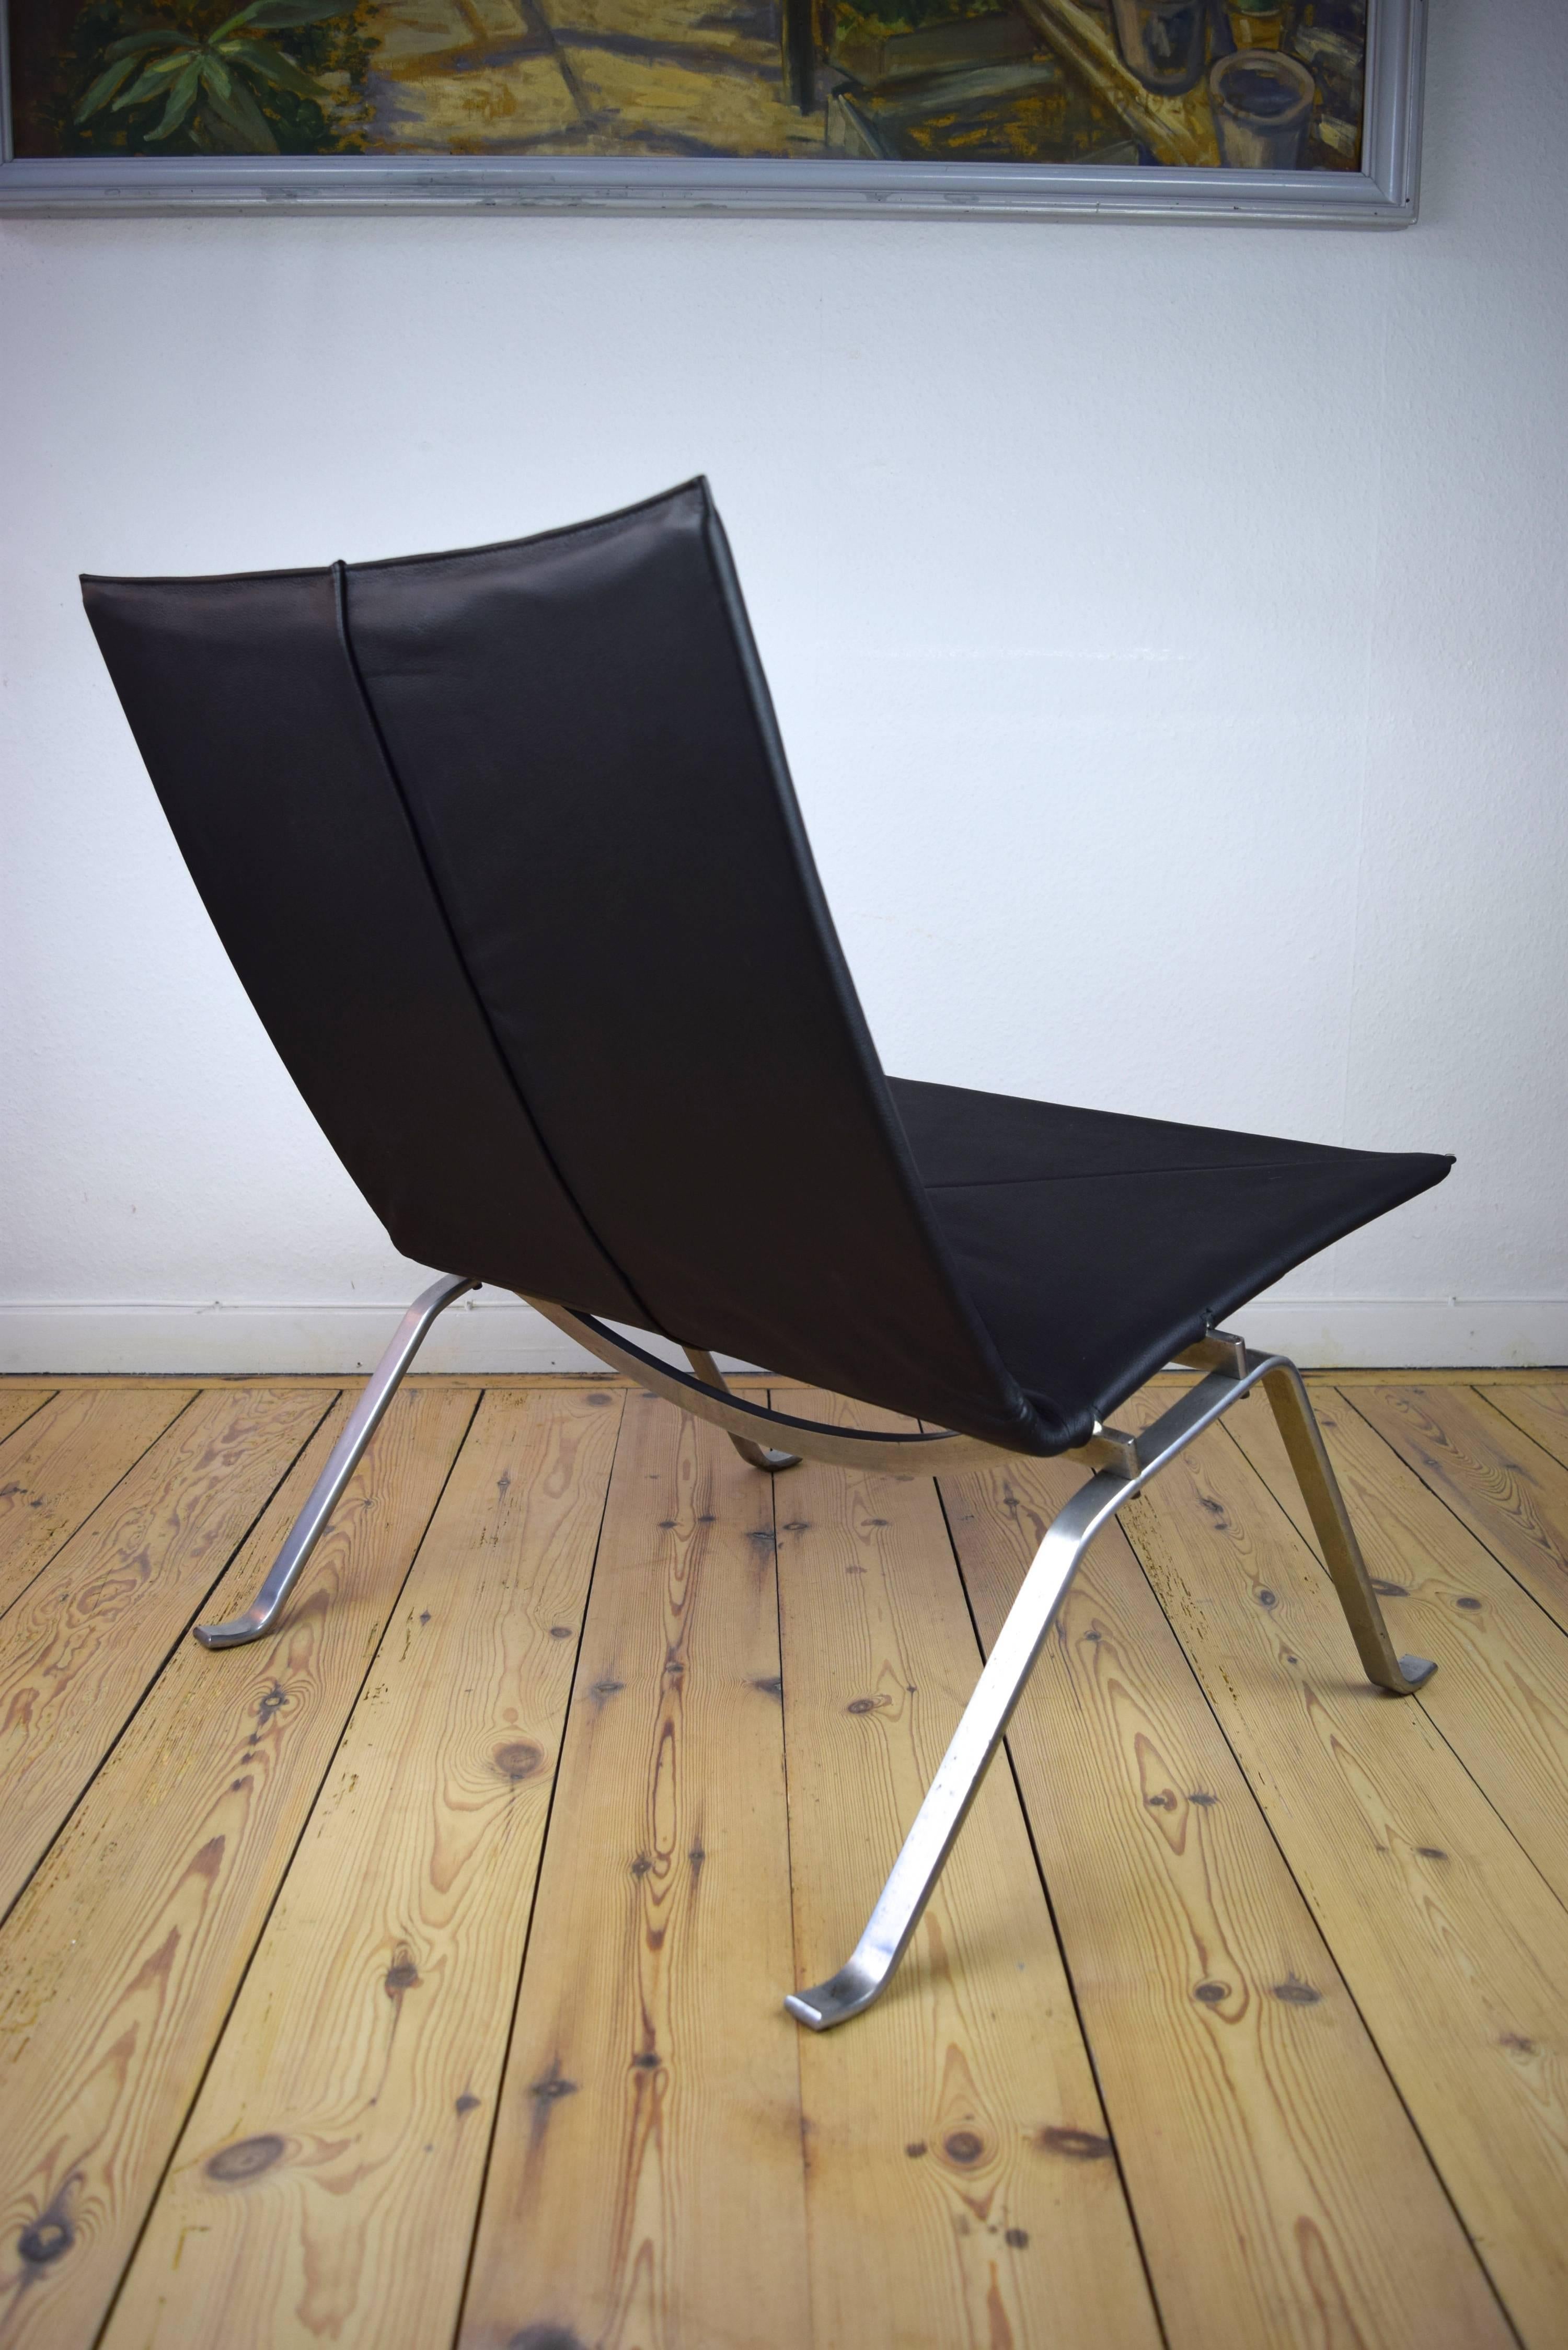 This PK-22 lounge chair was designed by Poul Kjærholm and is one of the original models produced by E.Kold Christensen from the 1950s to mid-1960s. The chair features a matte chrome plated steel base with black leather upholstery.